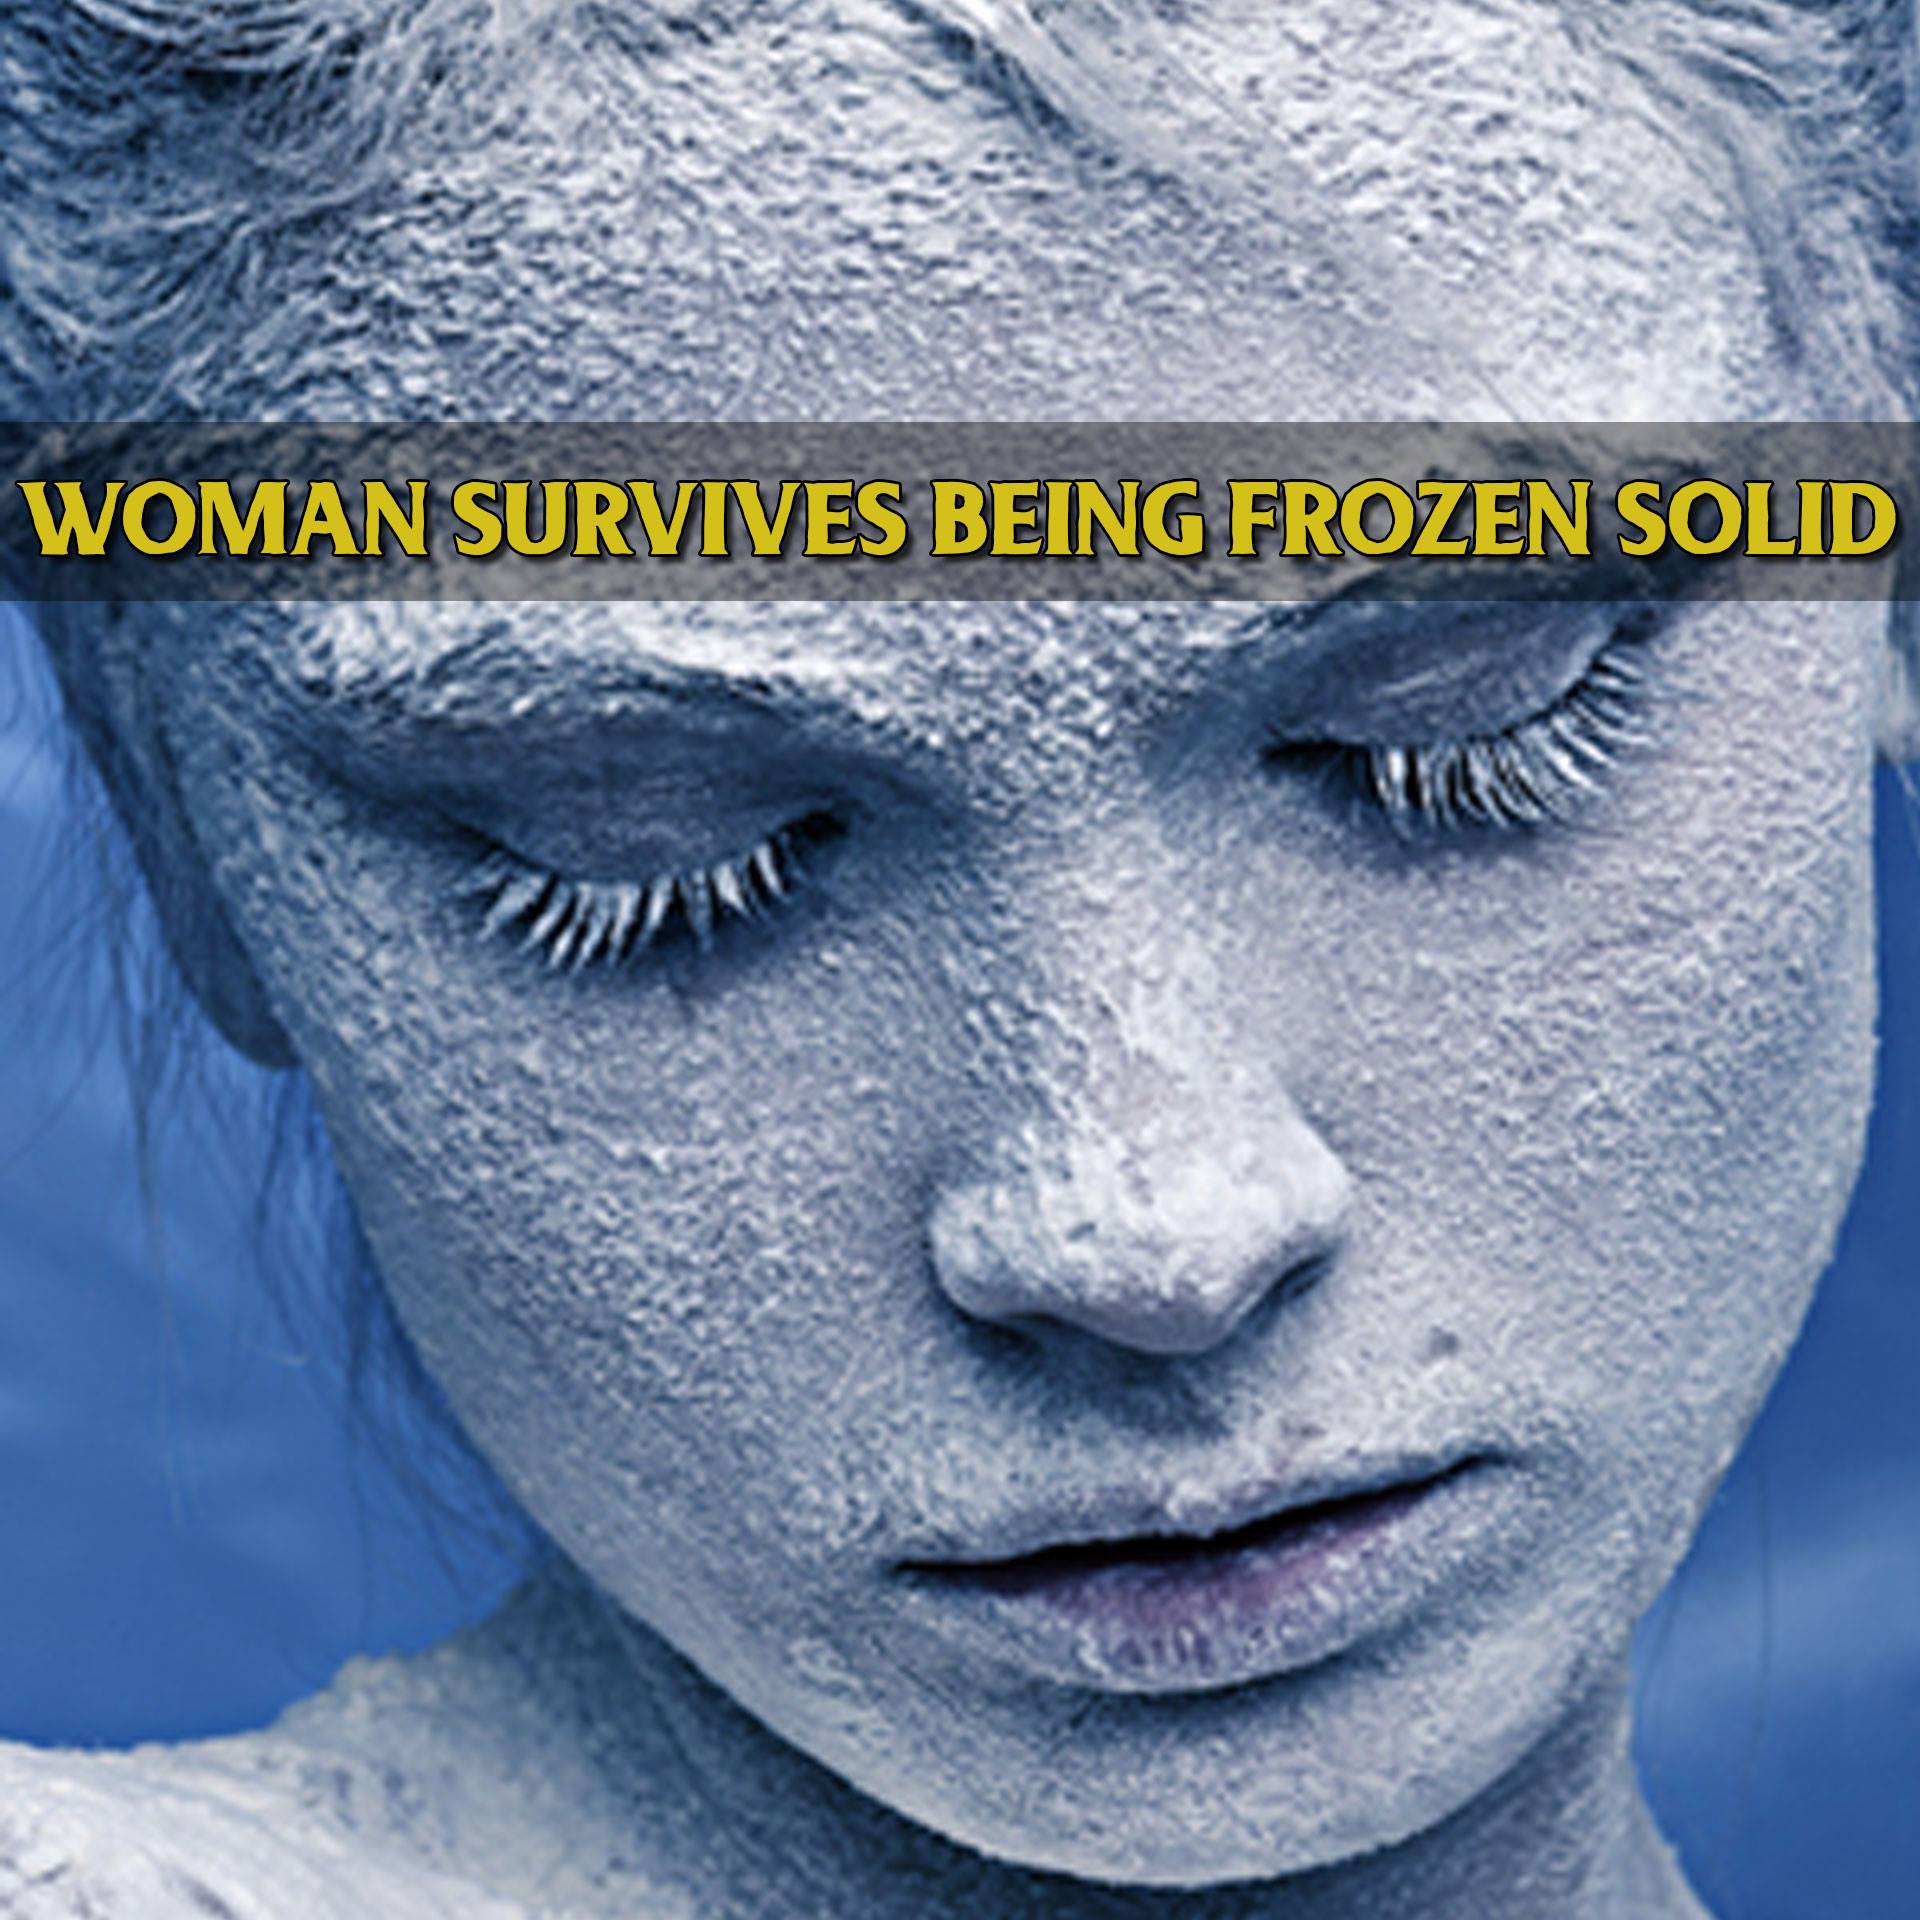 Here’s the story of a woman who survived after being frozen solid via Grave...